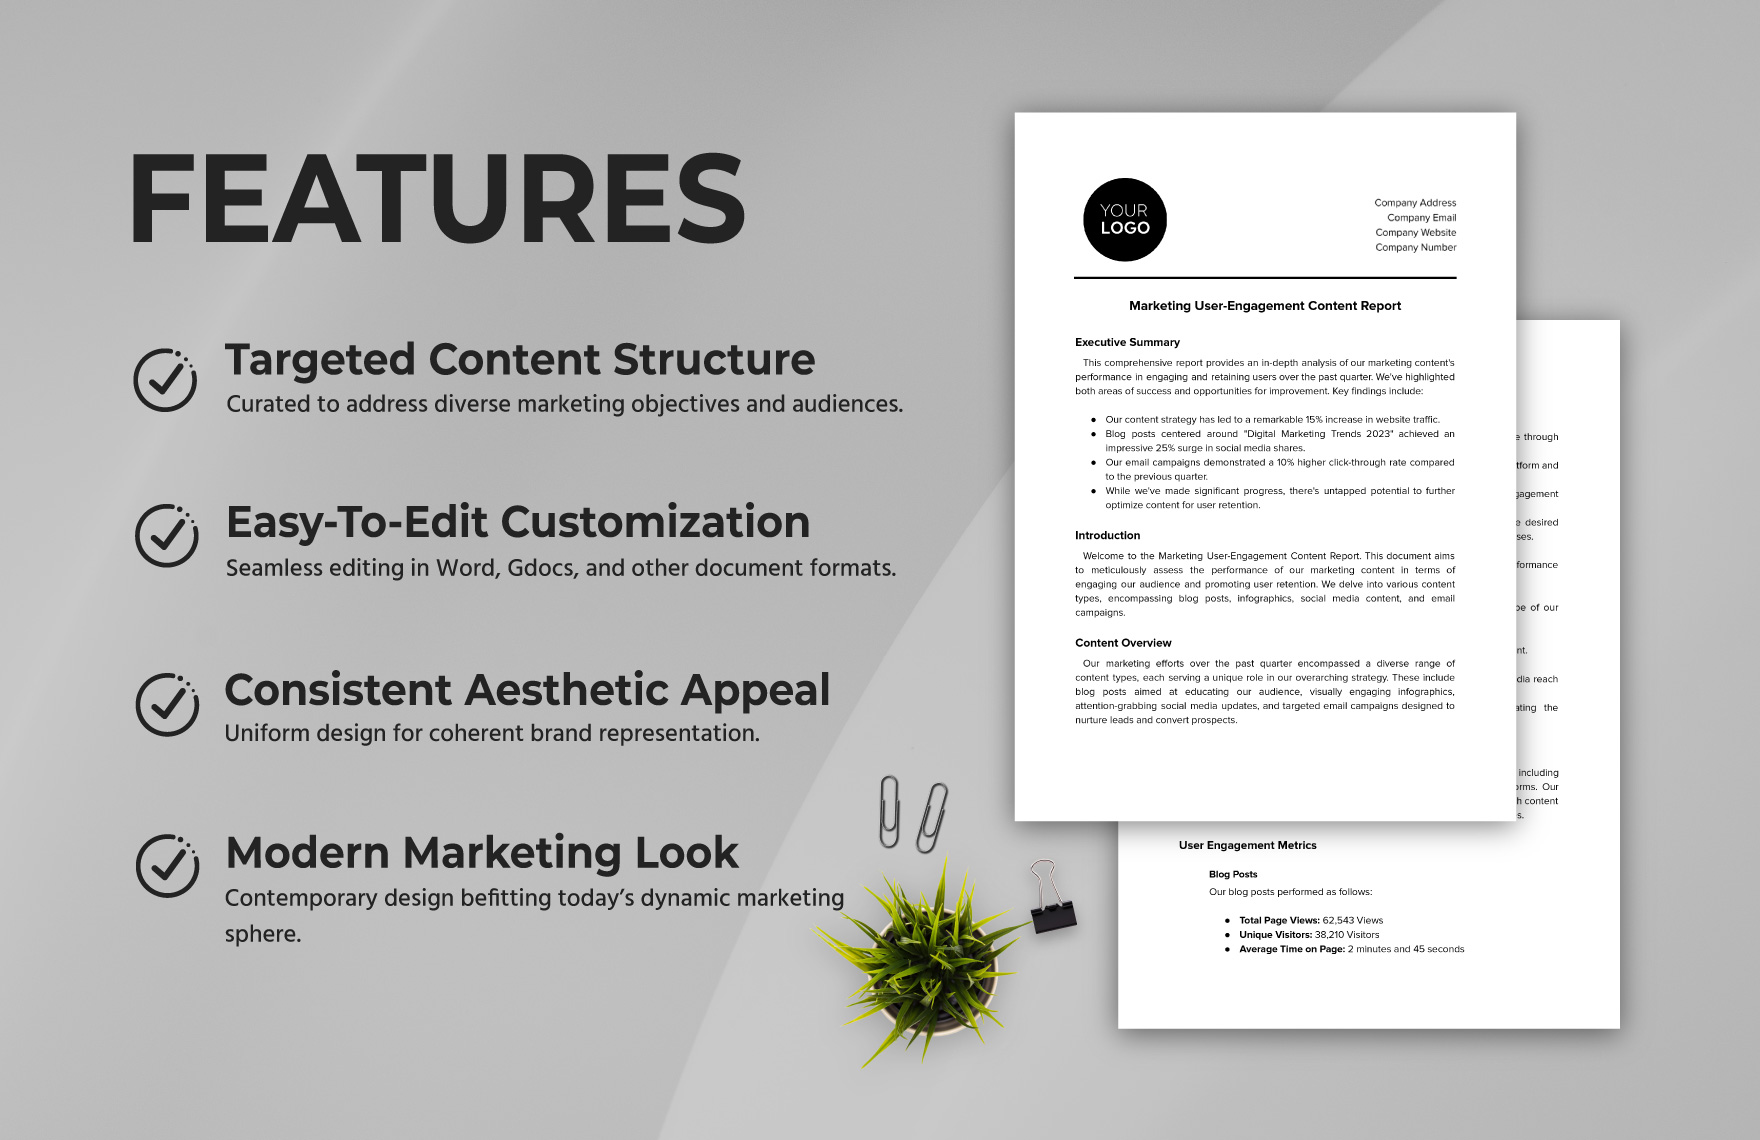 Marketing User-Engagement Content Report Template